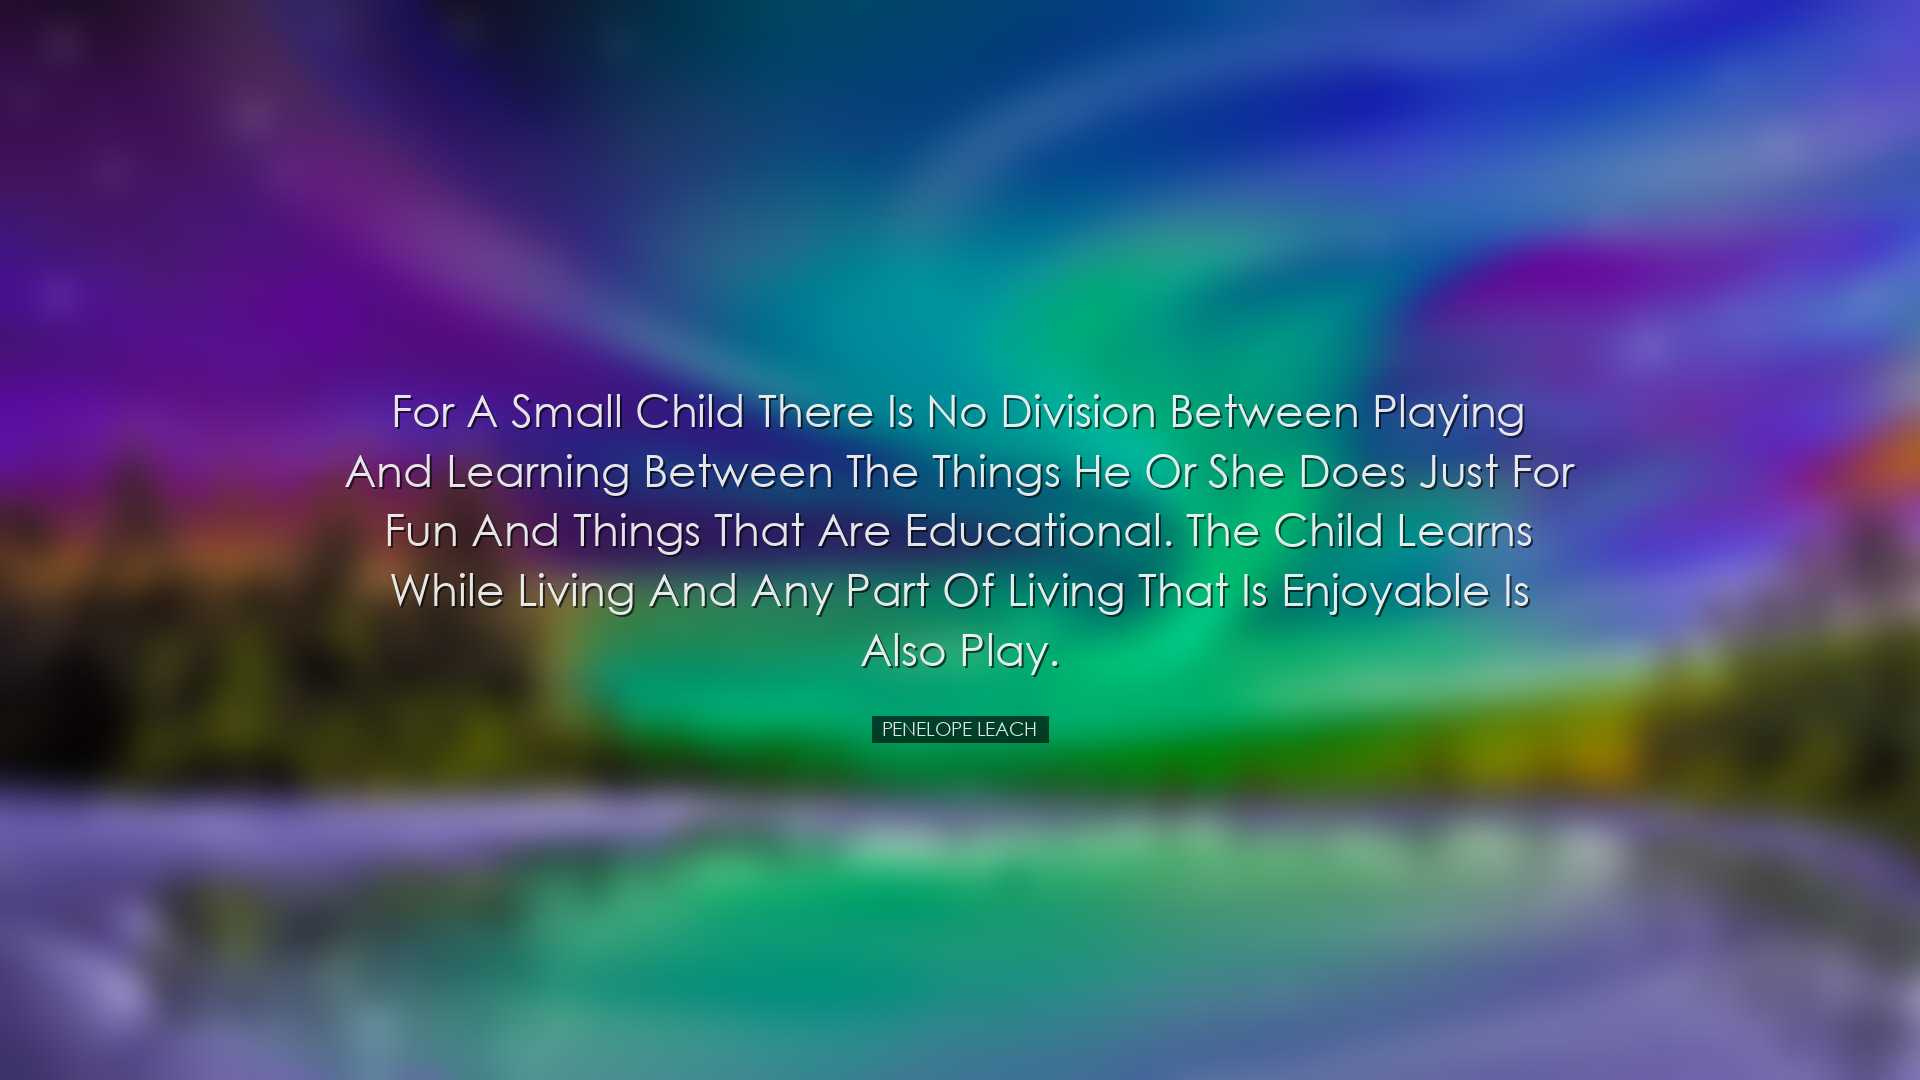 For a small child there is no division between playing and learnin